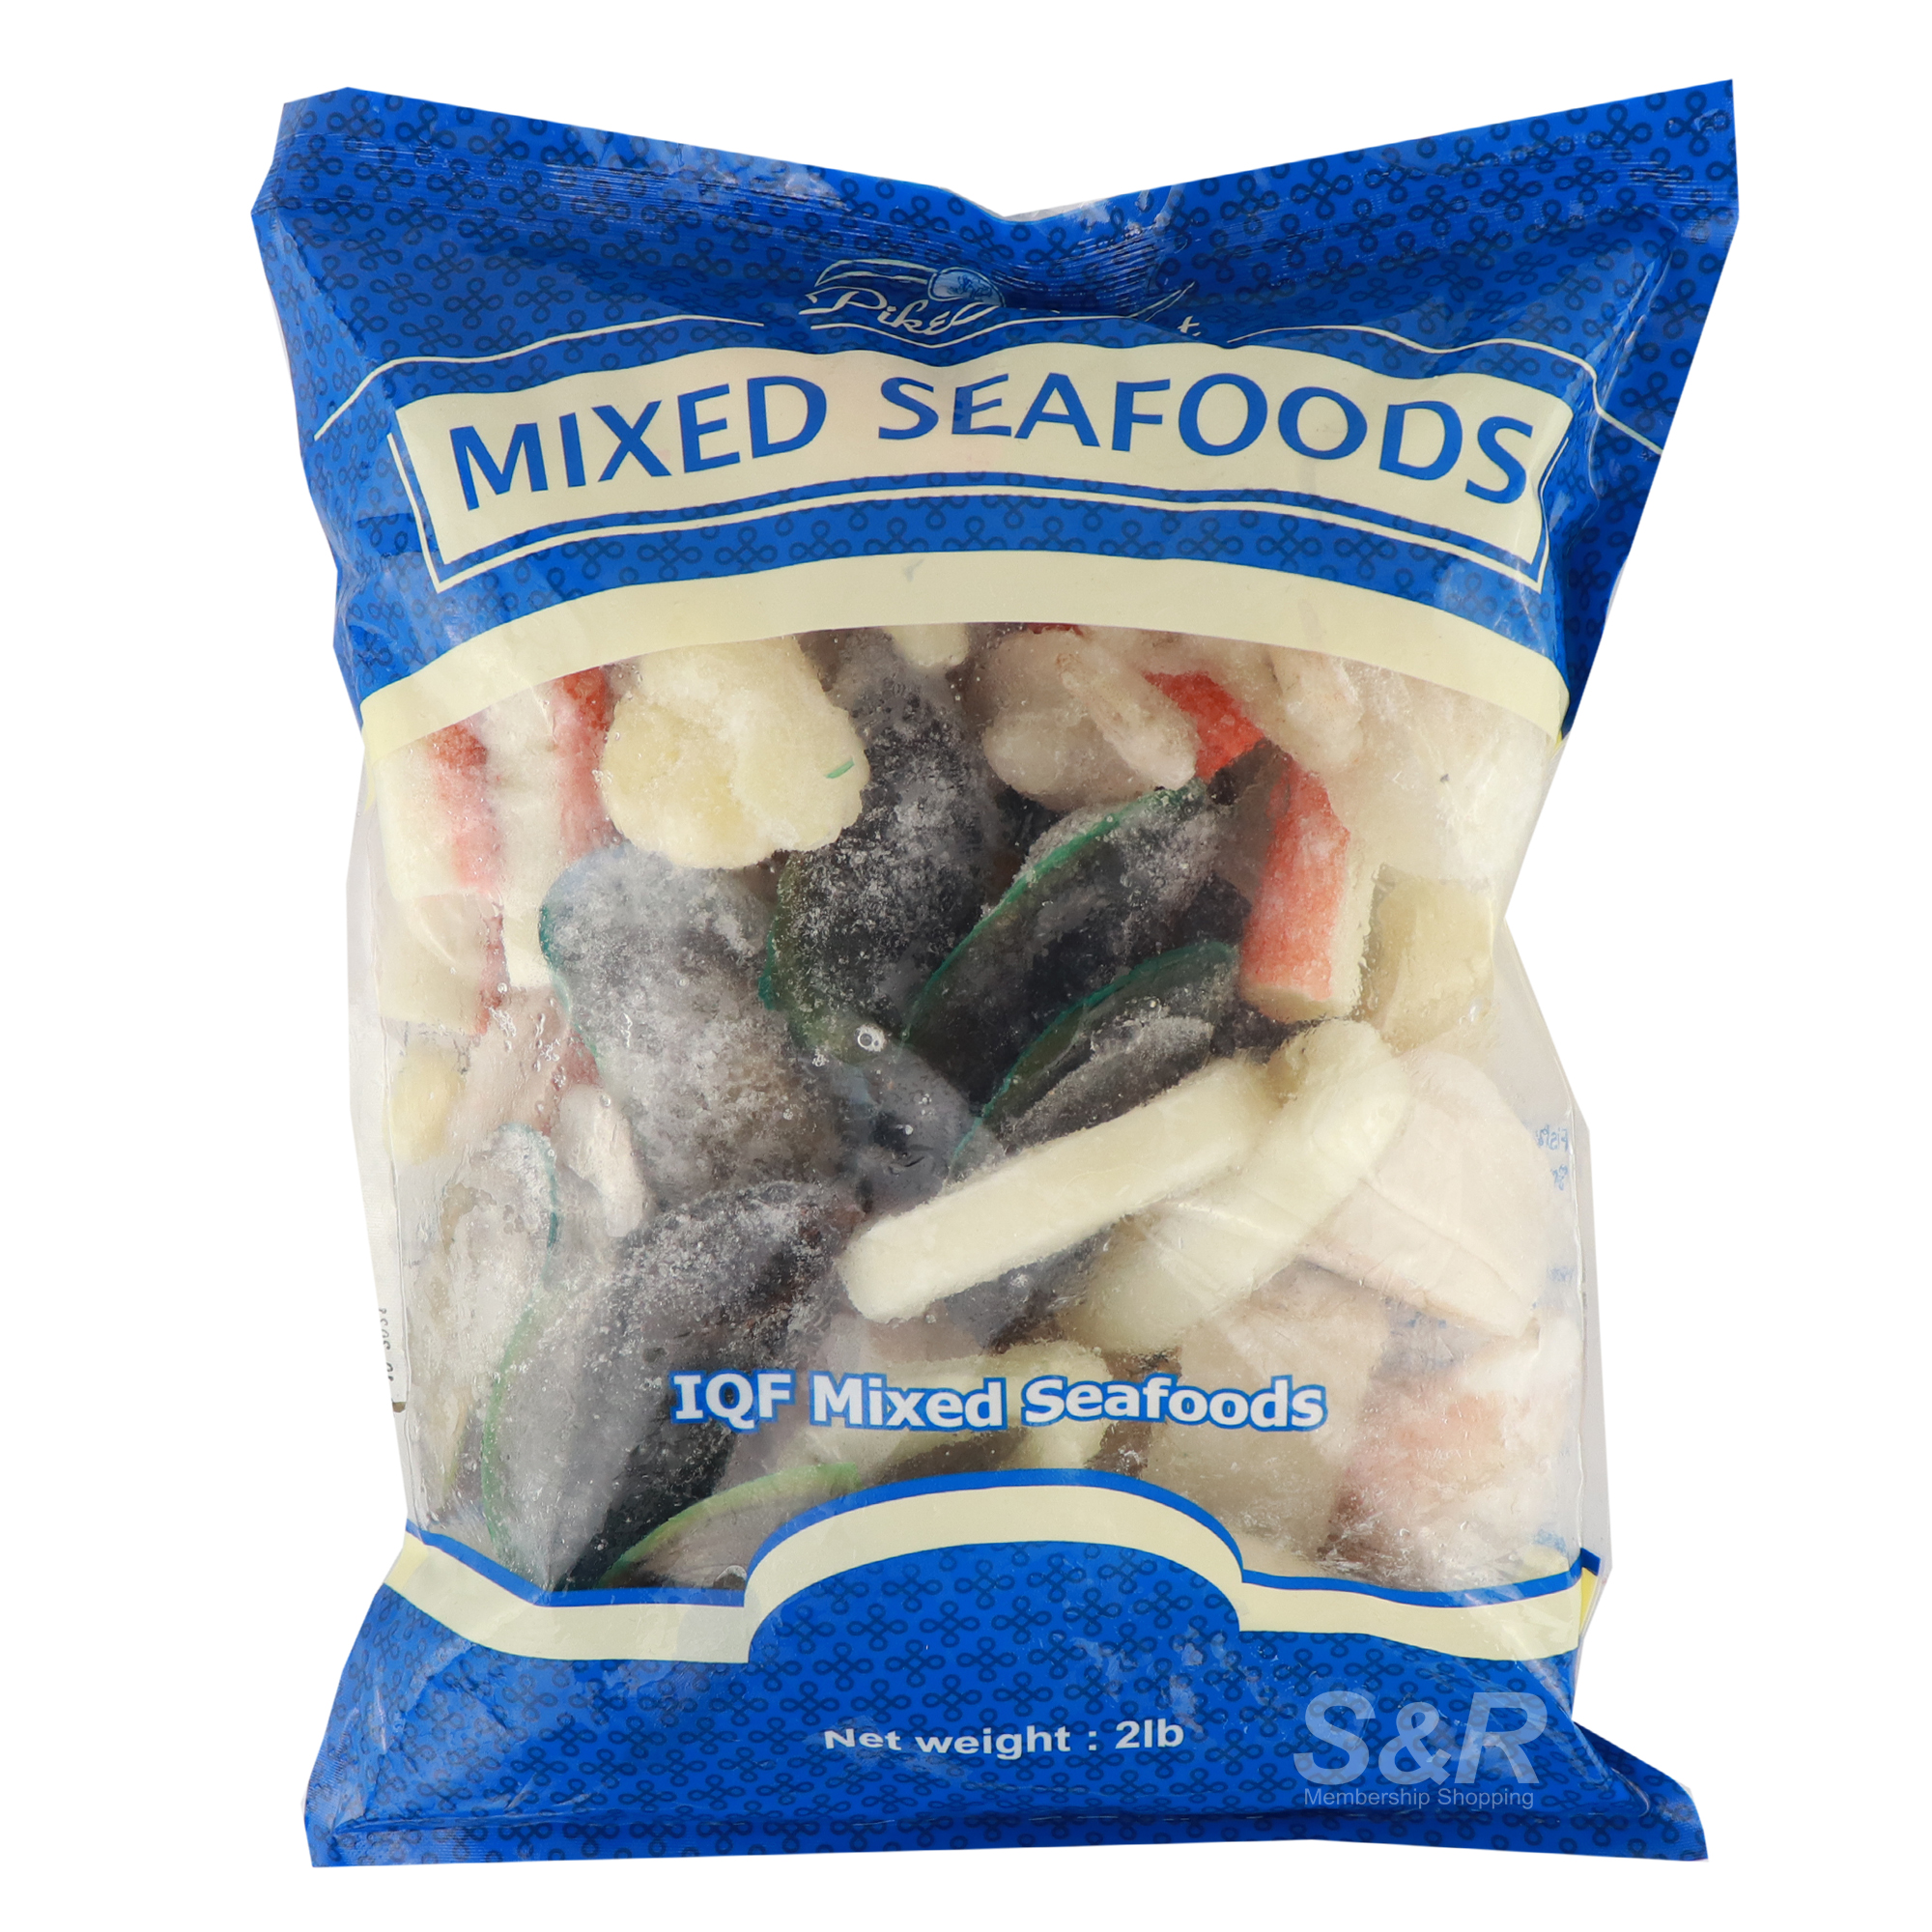 Pike Market Mixed Seafoods 907g